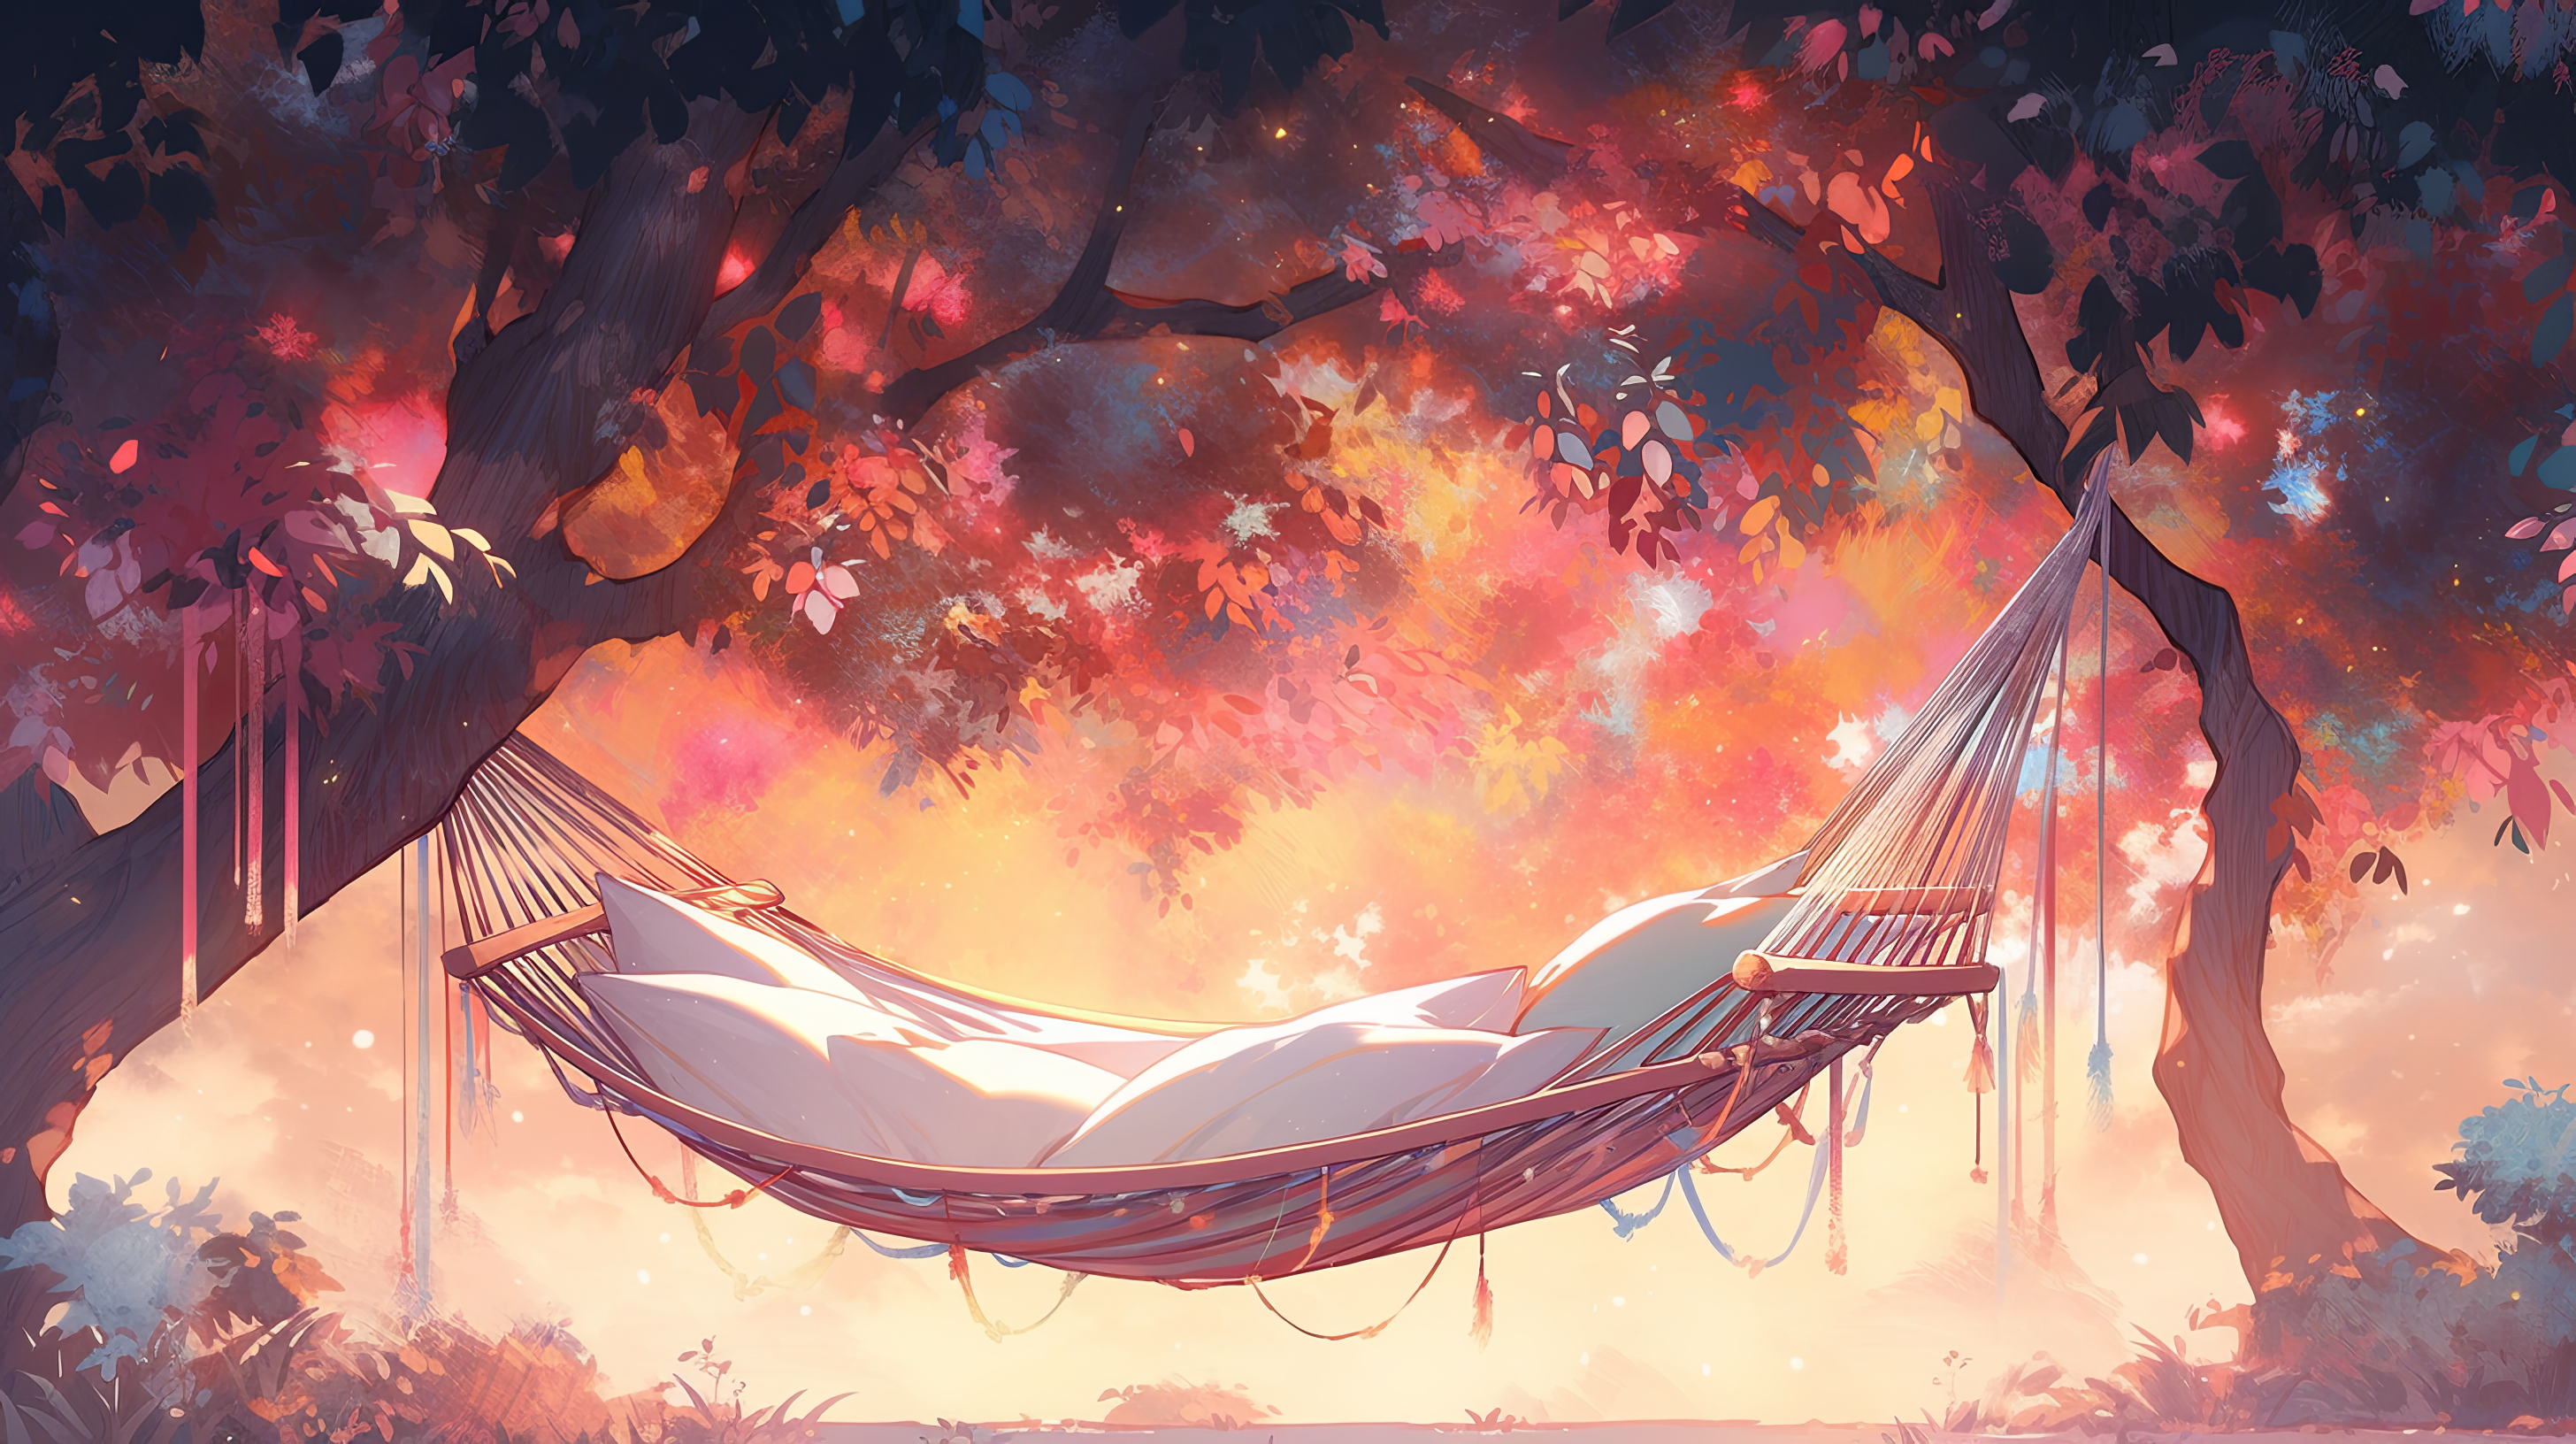 HD desktop wallpaper featuring an AI art-inspired hammock gently swaying between trees with a backdrop of a vibrant, colorful sunset sky.